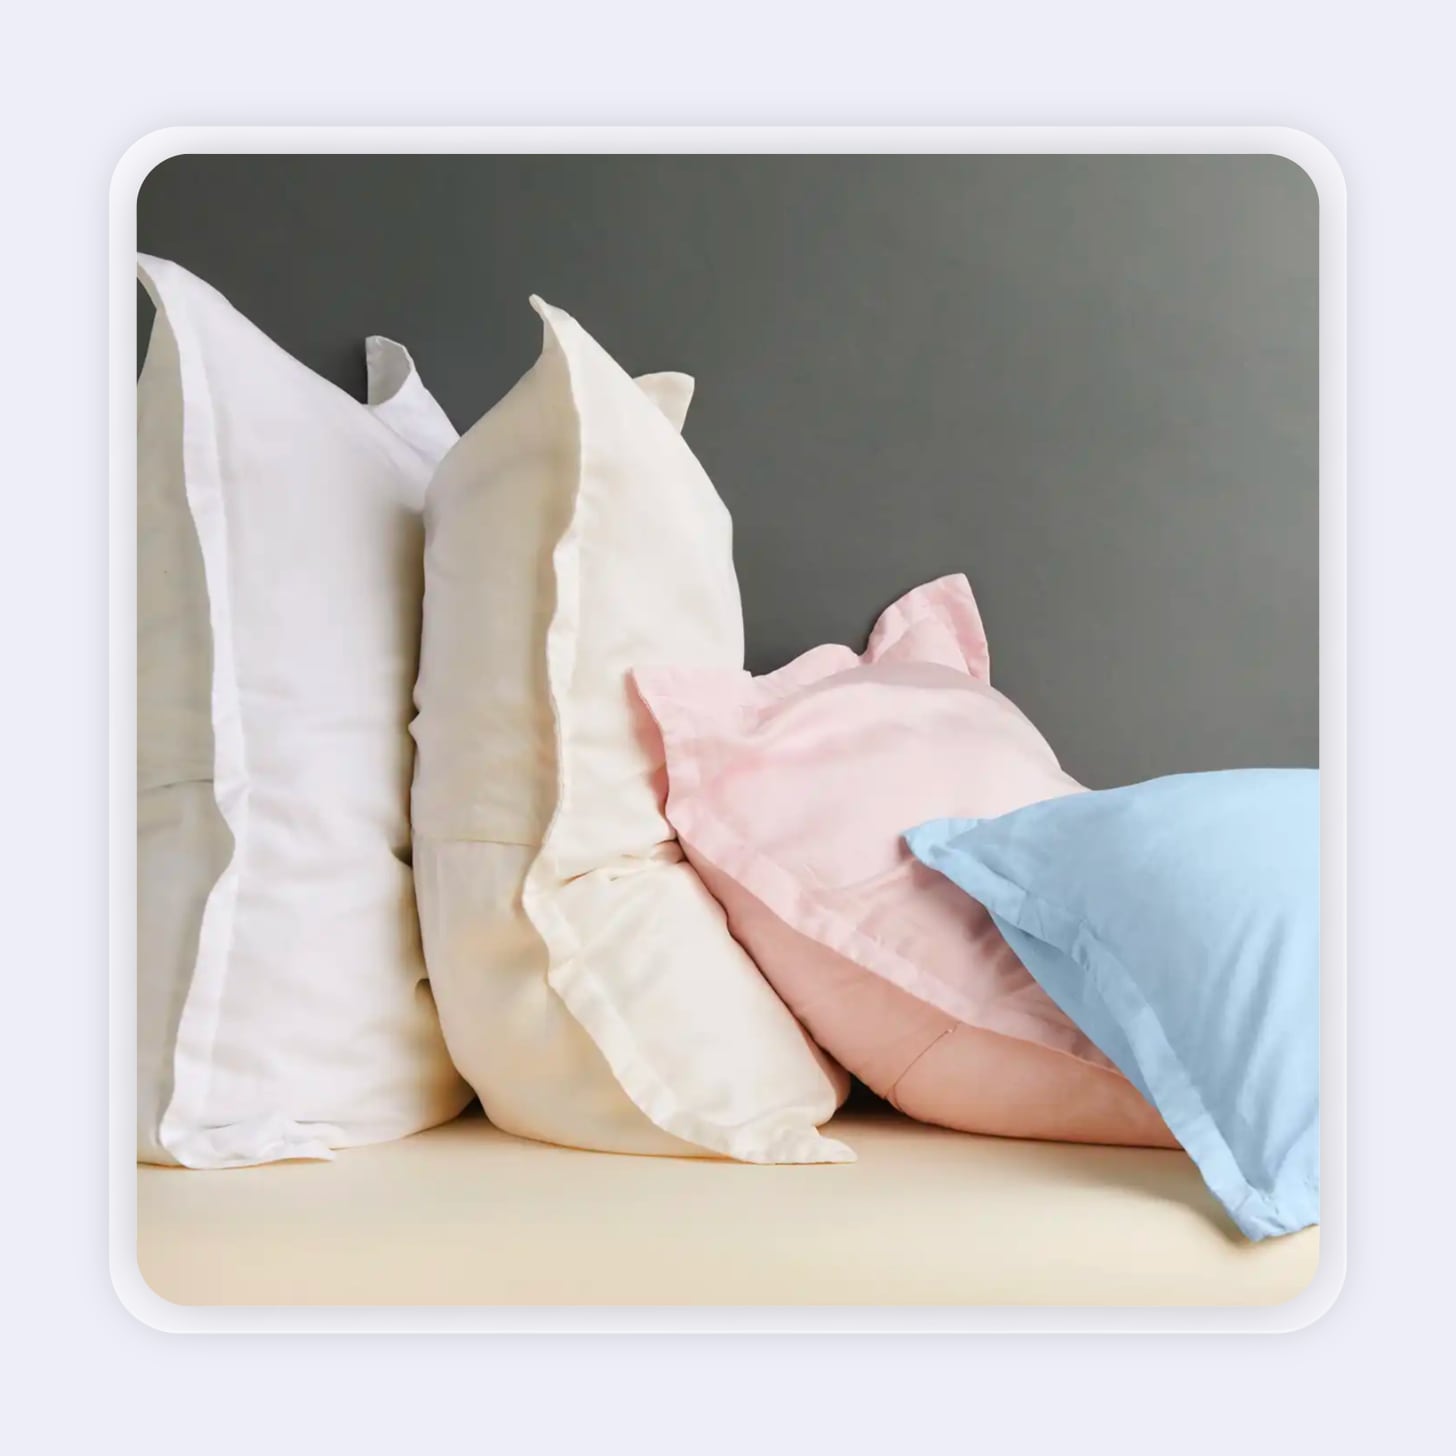 Several colorful pastel pillows